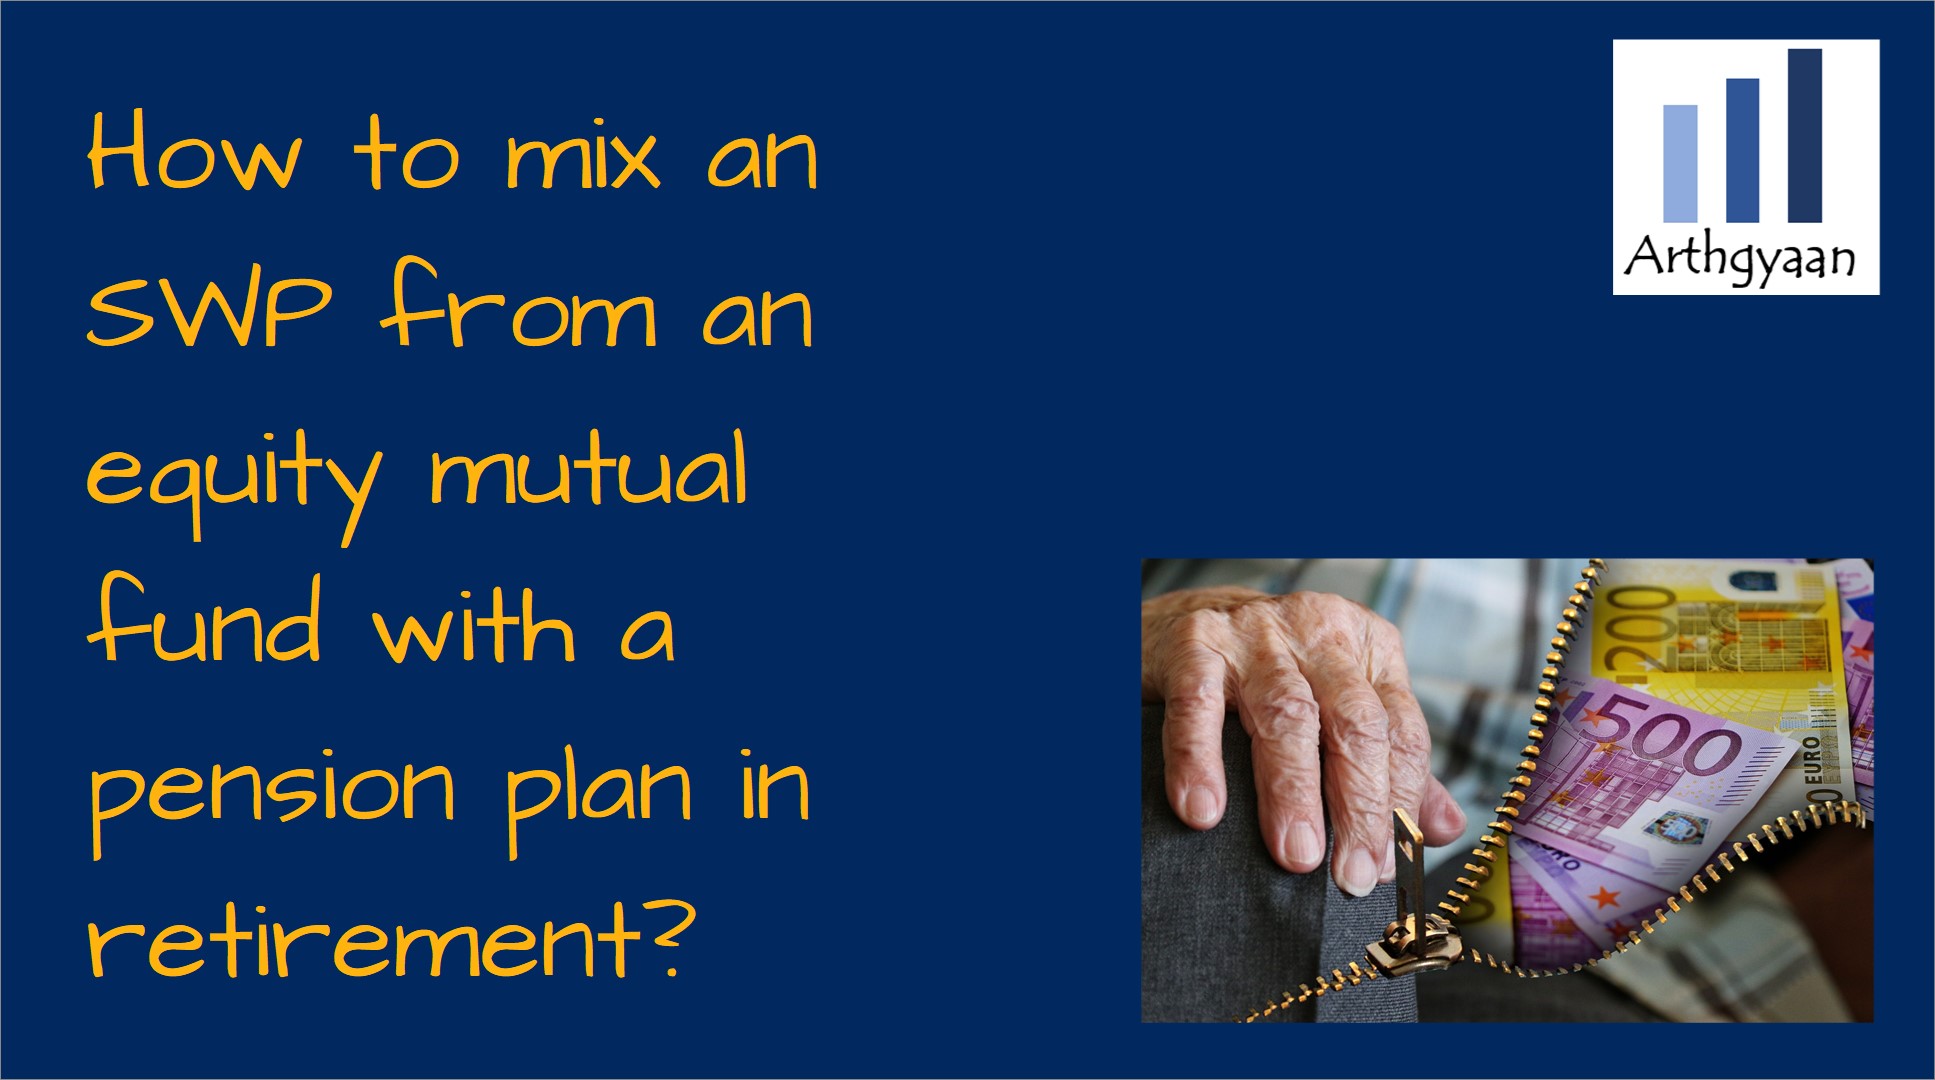 How to mix an SWP from equity mutual fund with a pension plan in retirement?